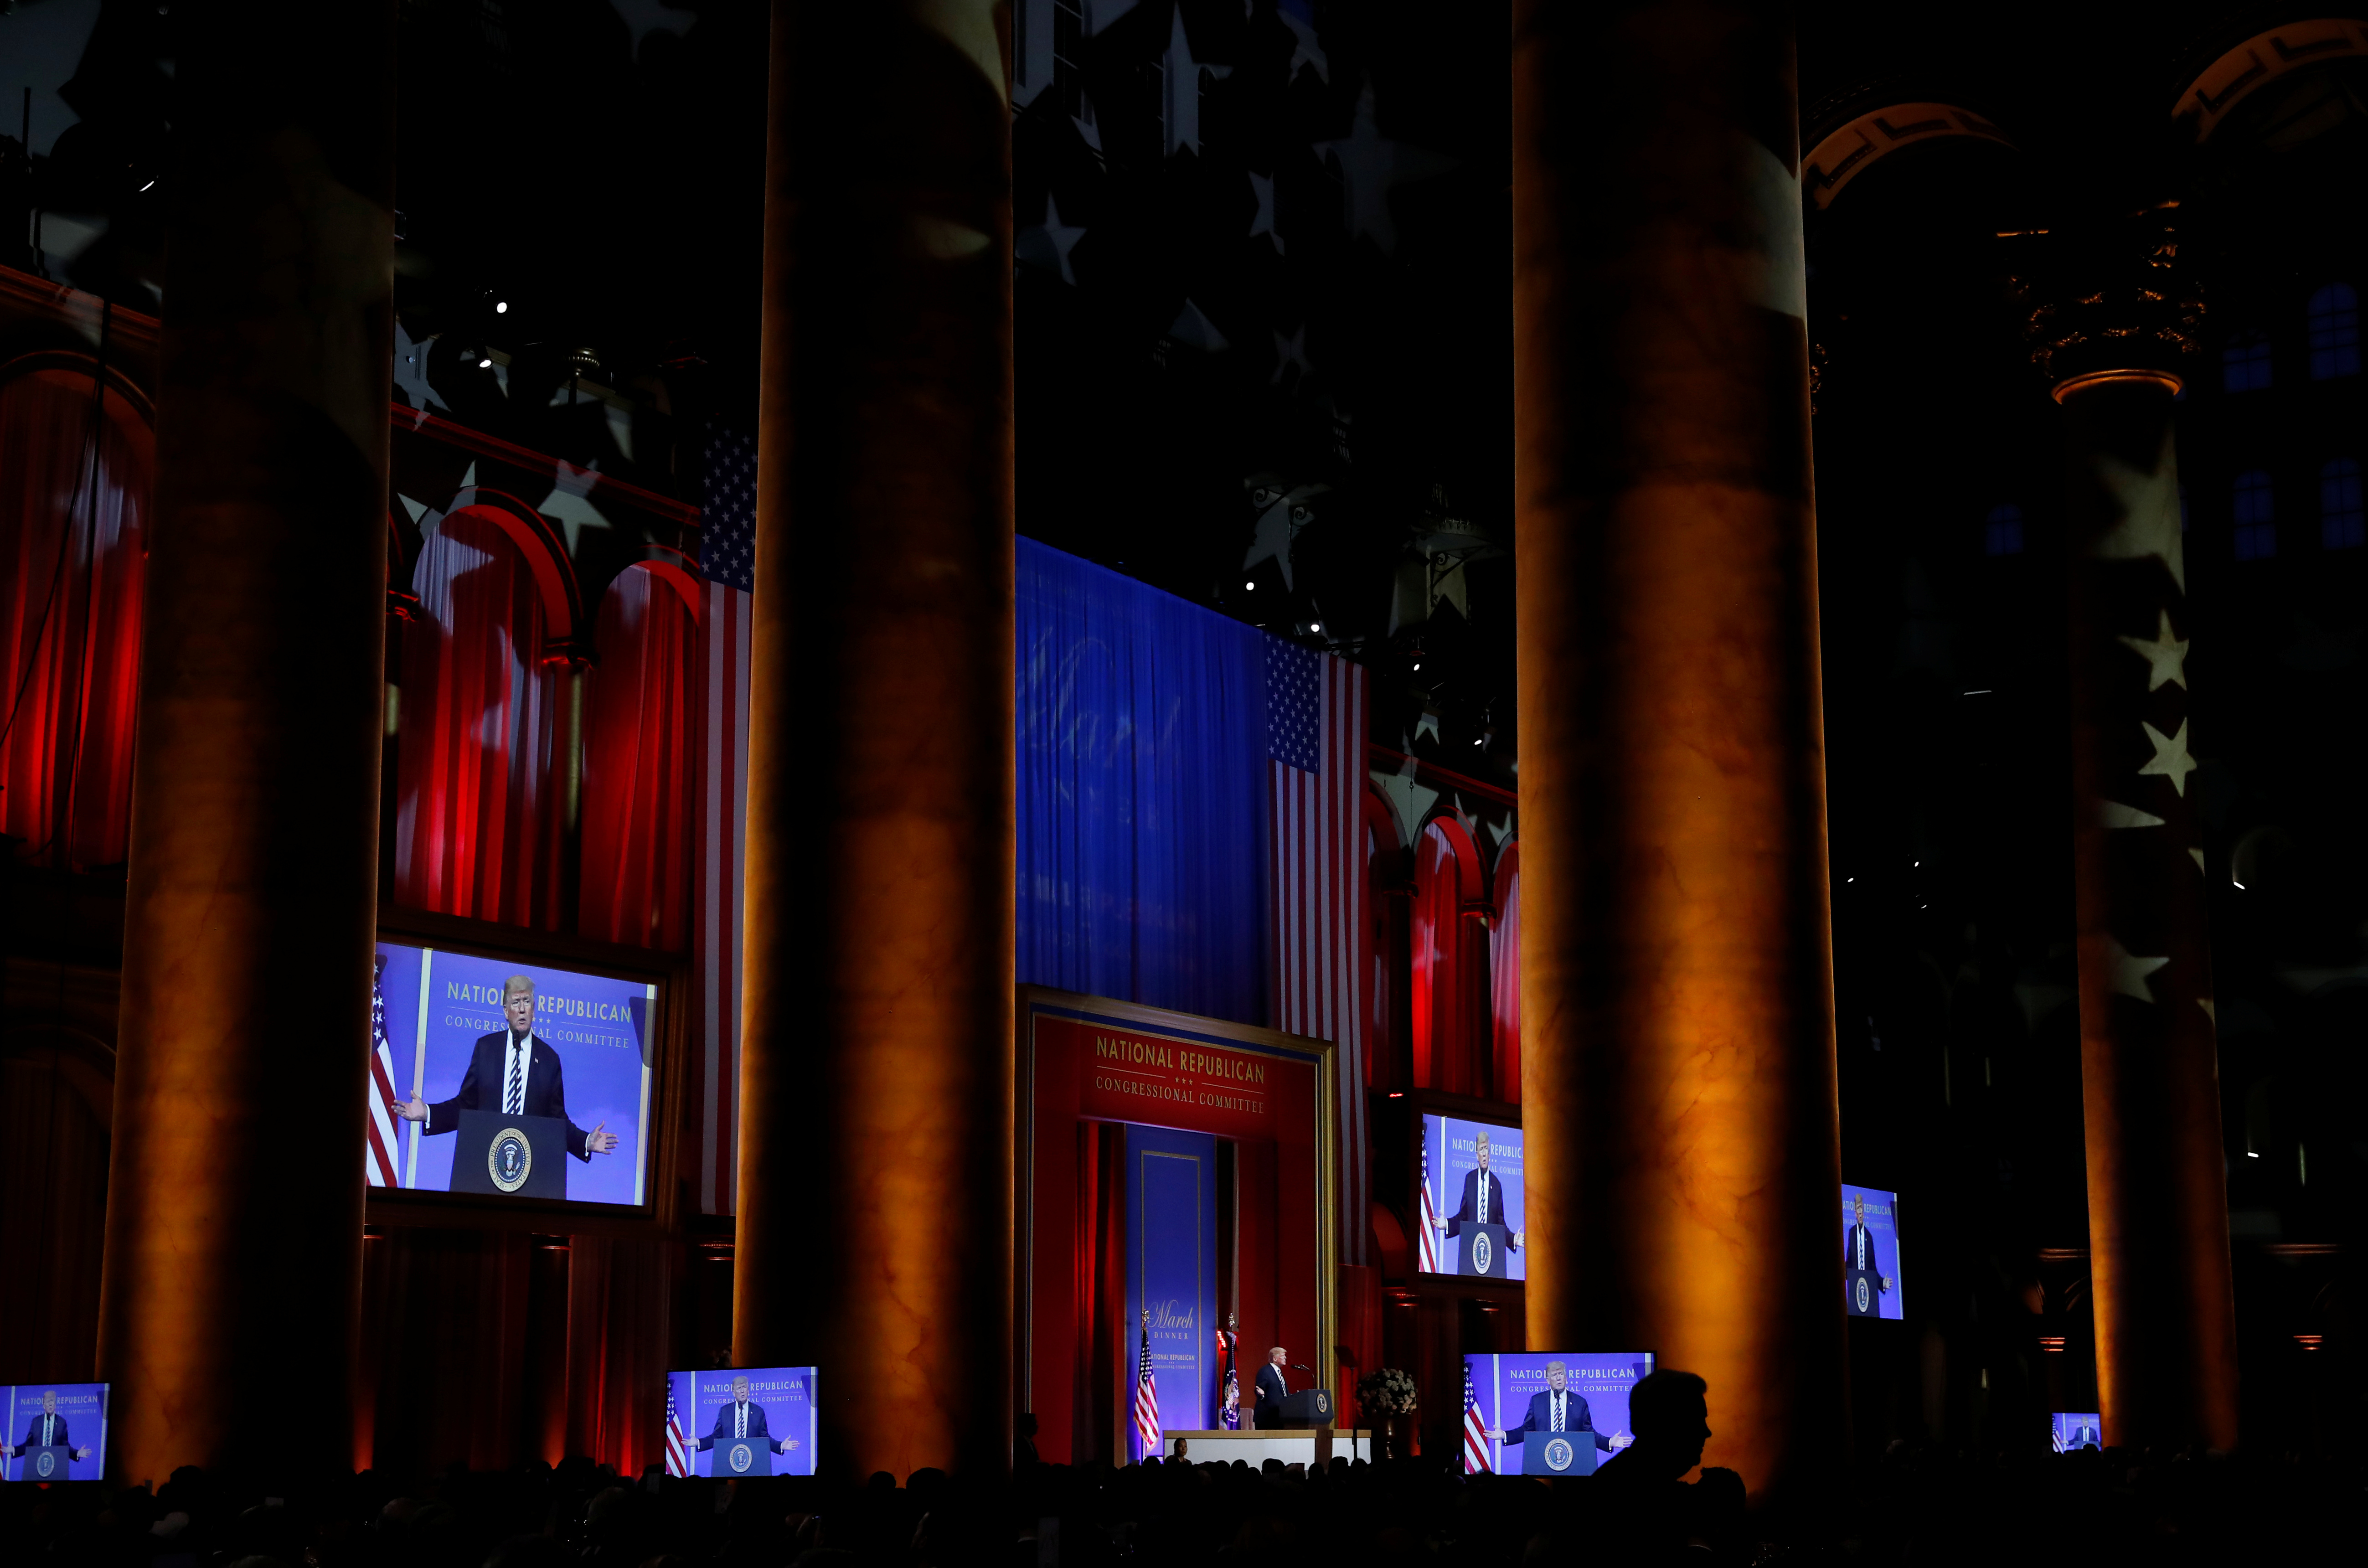 U.S. President Donald Trump delivers remarks at the National Republican Congressional Committee's annual March dinner at the National Building Museum in Washington, U.S., March 20, 2018. REUTERS/Leah Millis